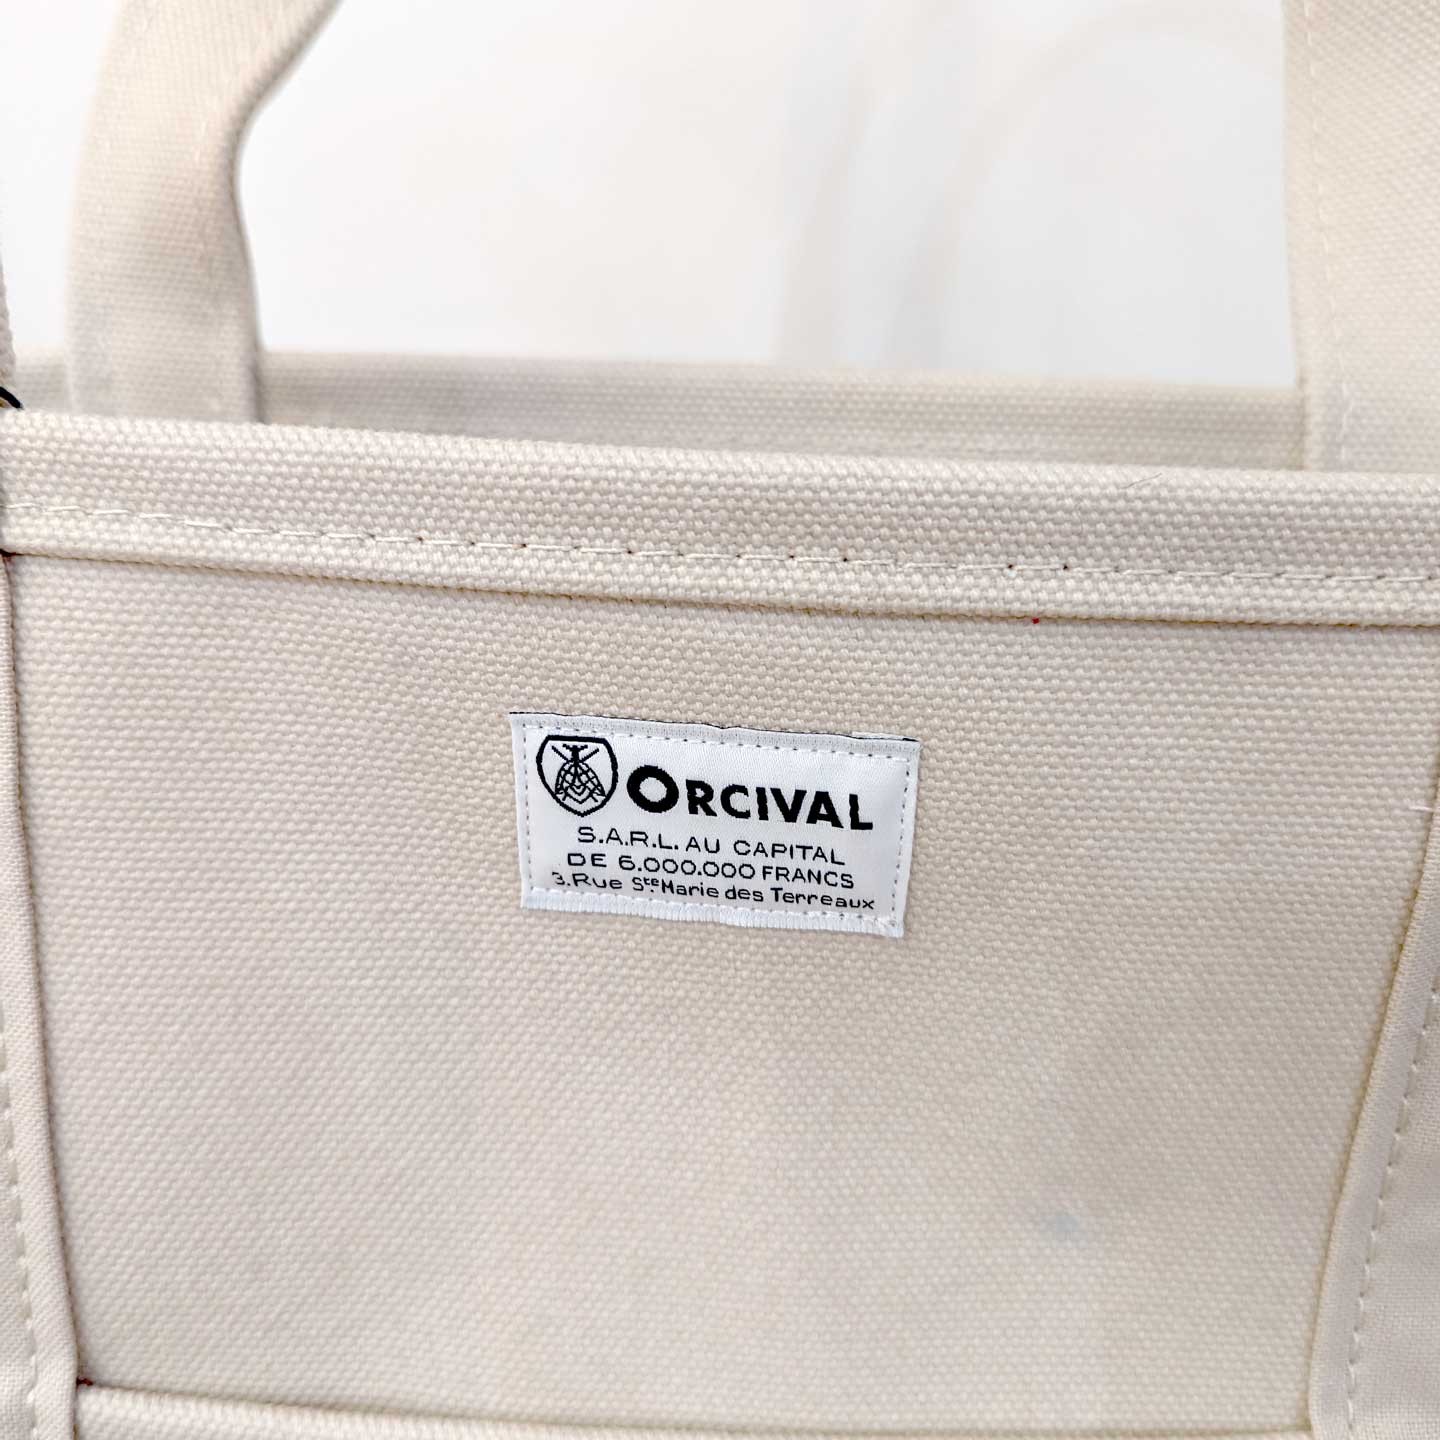 The Sand Beige tote-bag by Orcival in medium size